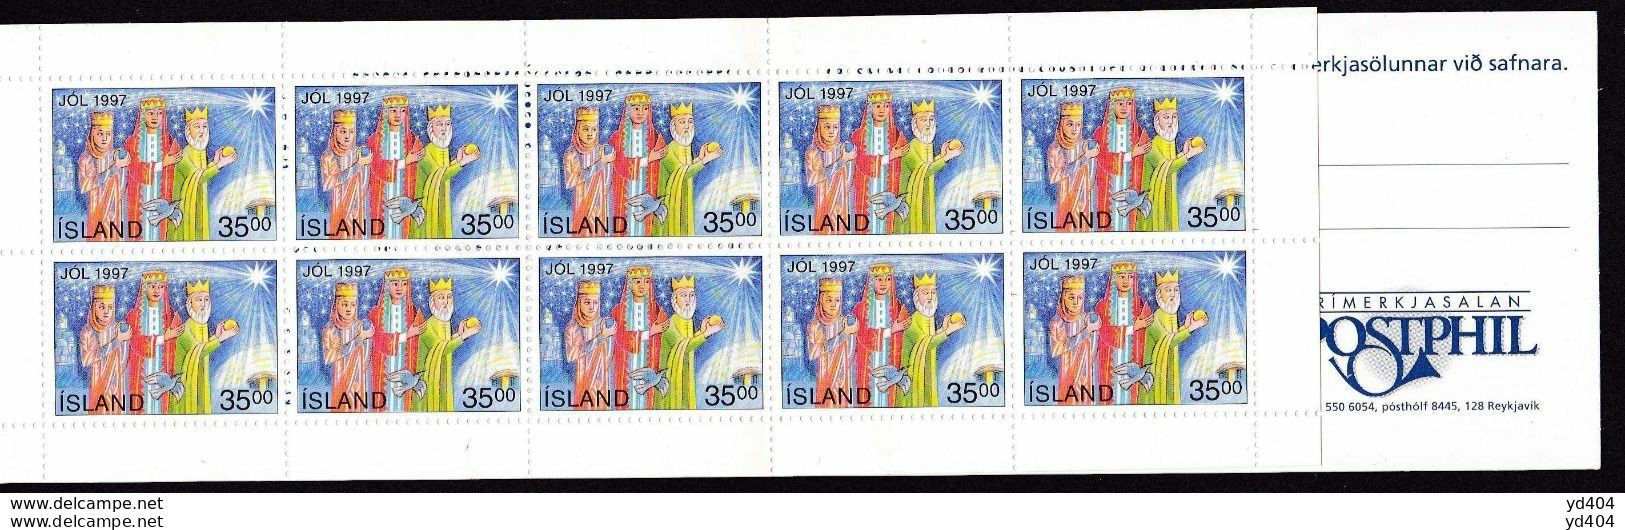 IS669 – ISLANDE - ICELAND - BOOKLETS - 1997 - CHRISTMAS - Y&T # C833 MNH 16 € - Booklets